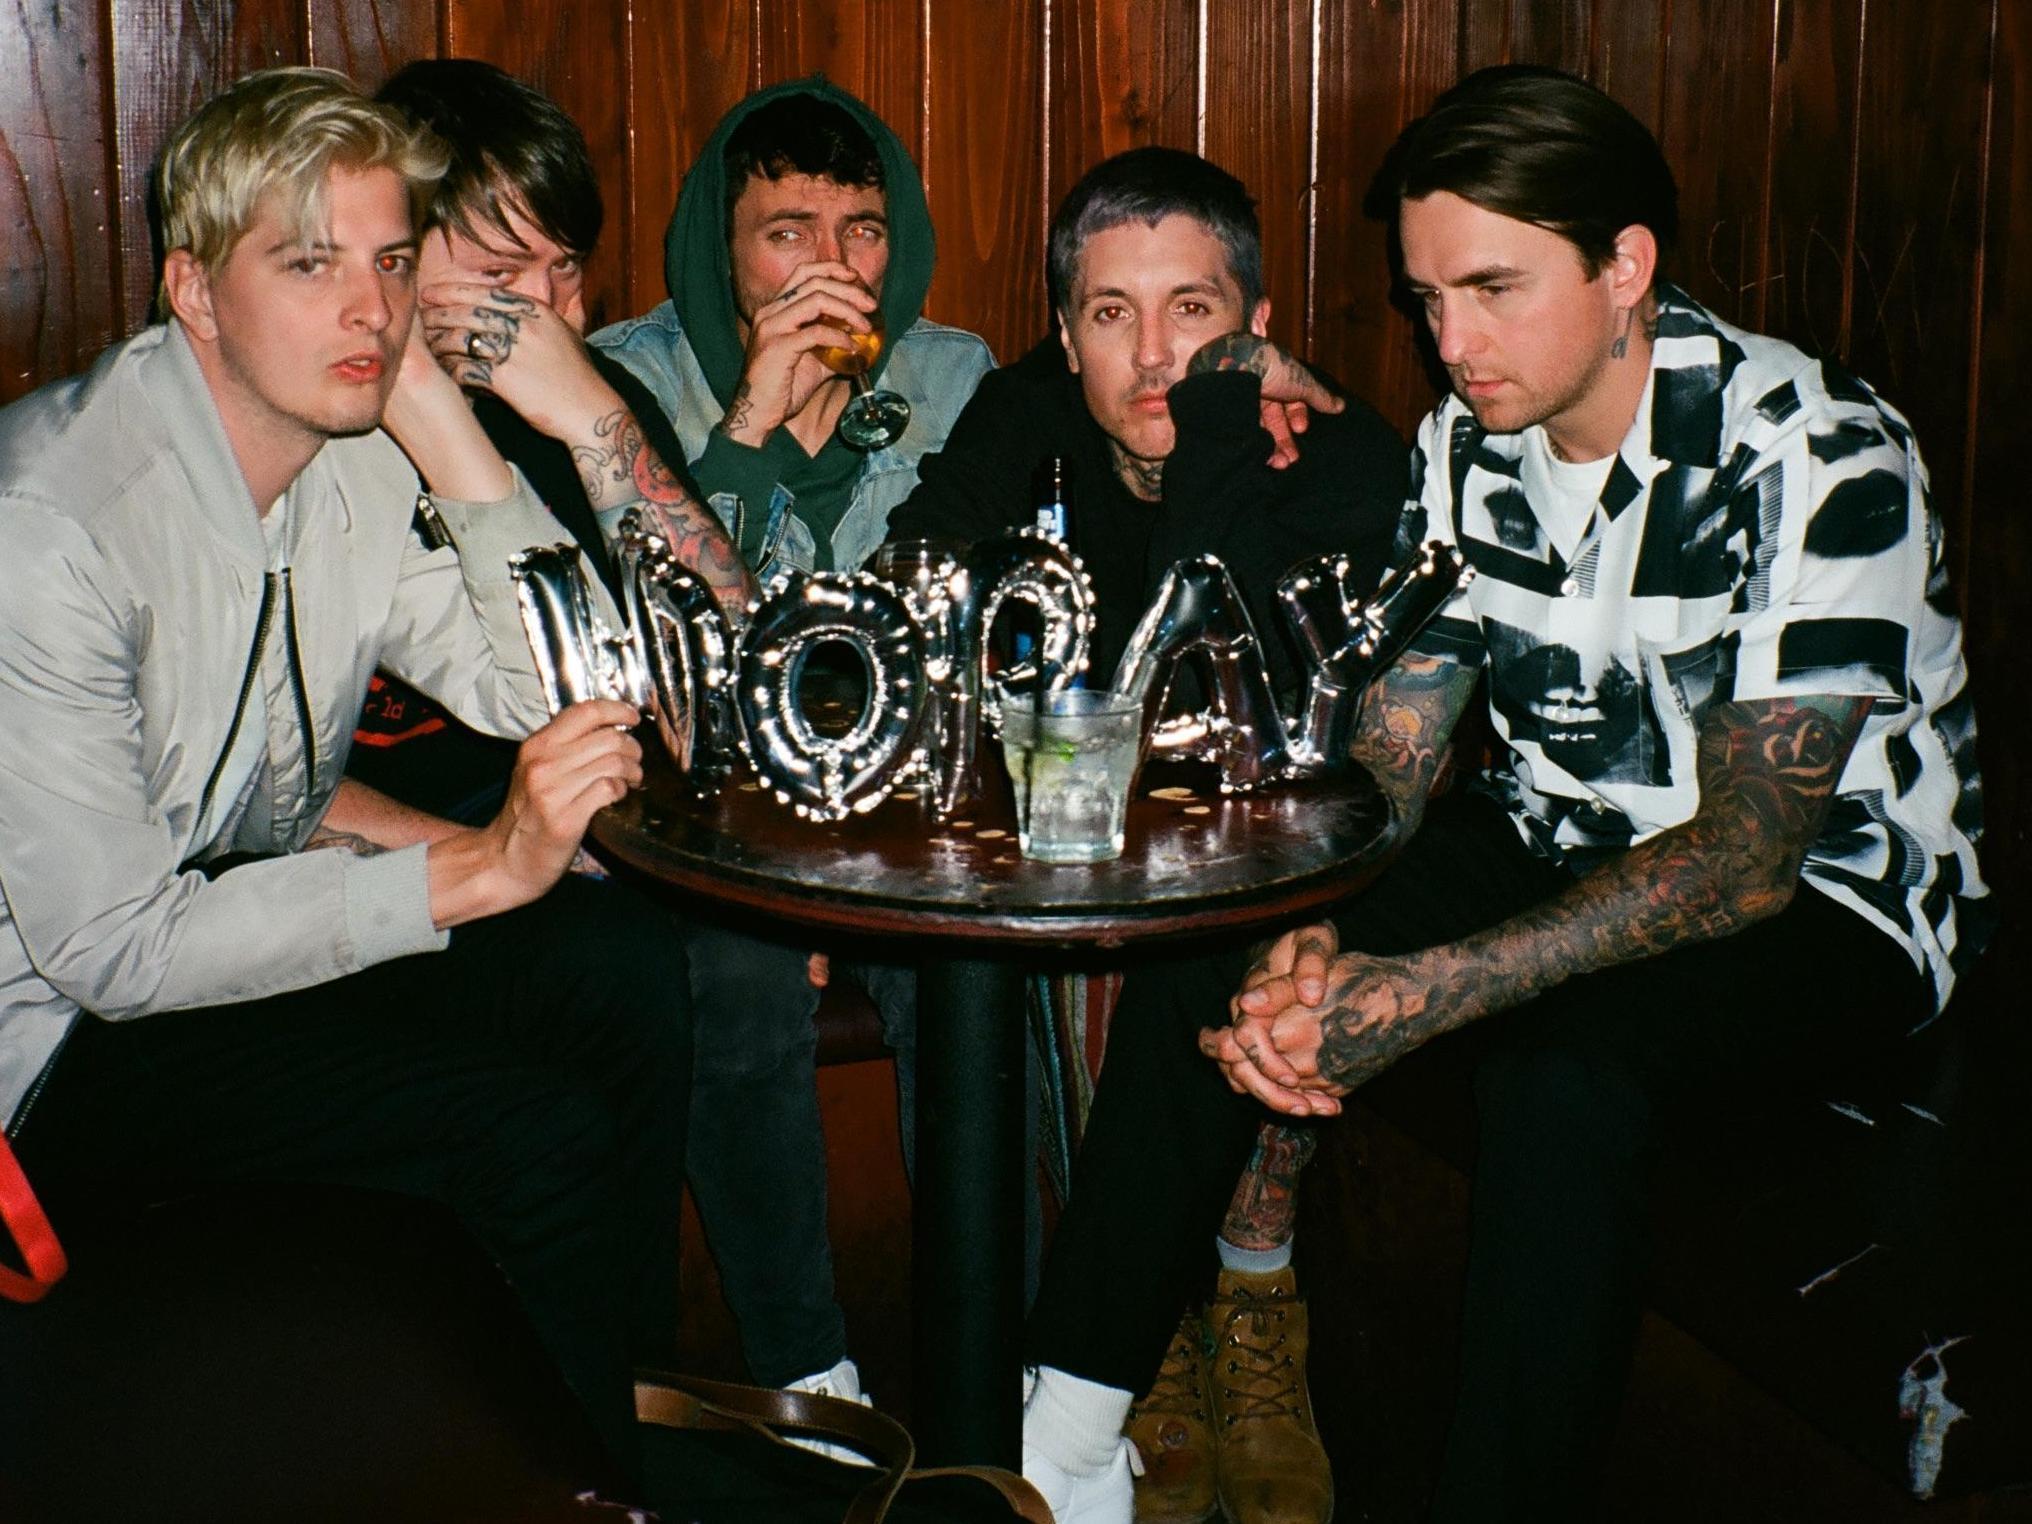 Bring Me the Horizon review, Amo: Daring album is likely to divide fans, The Independent